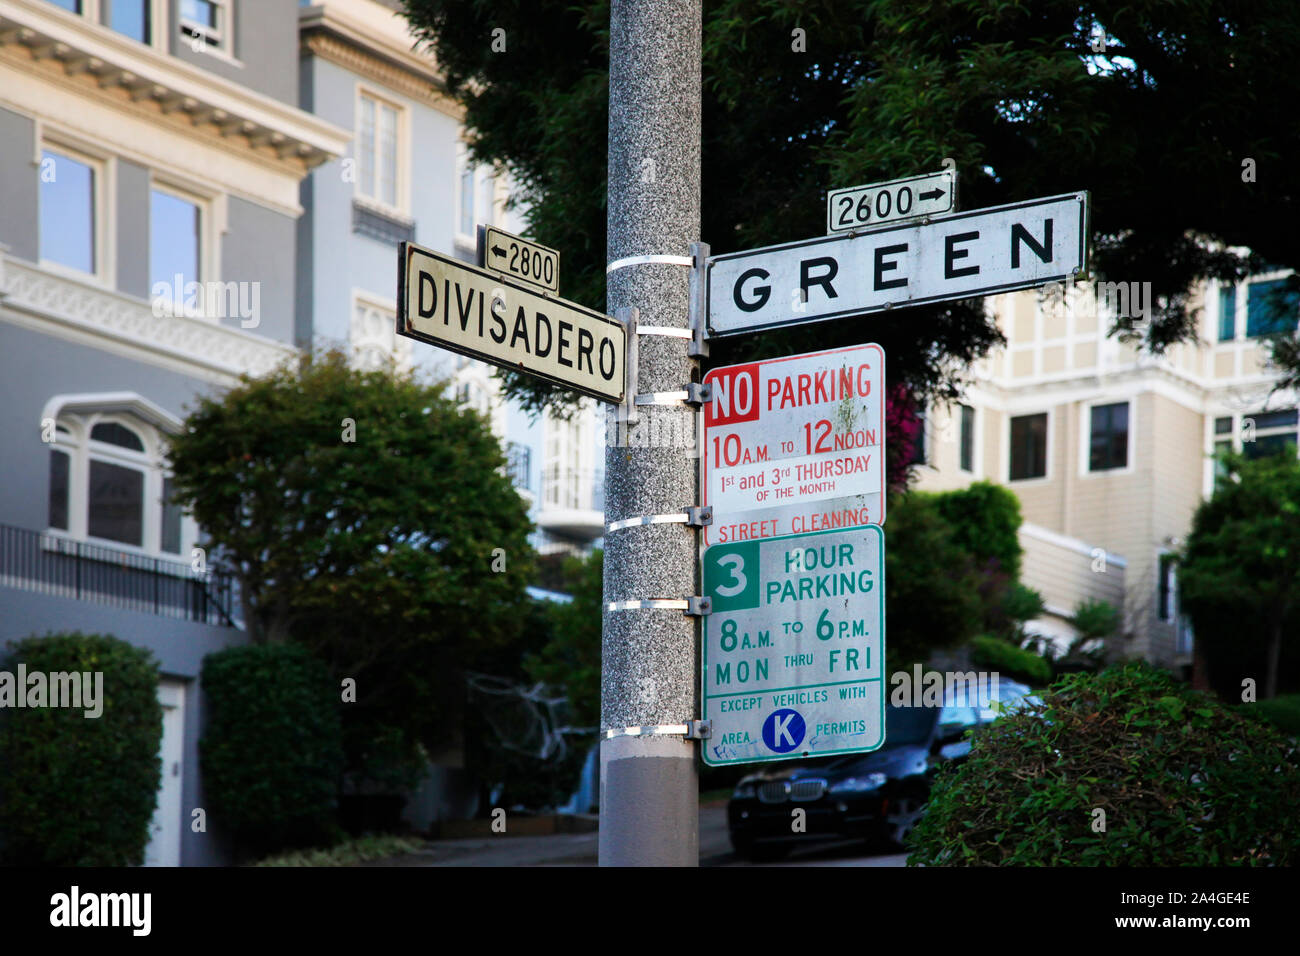 At the intersection of Divisadero Street and Green Street in San Francisco, California. Stock Photo